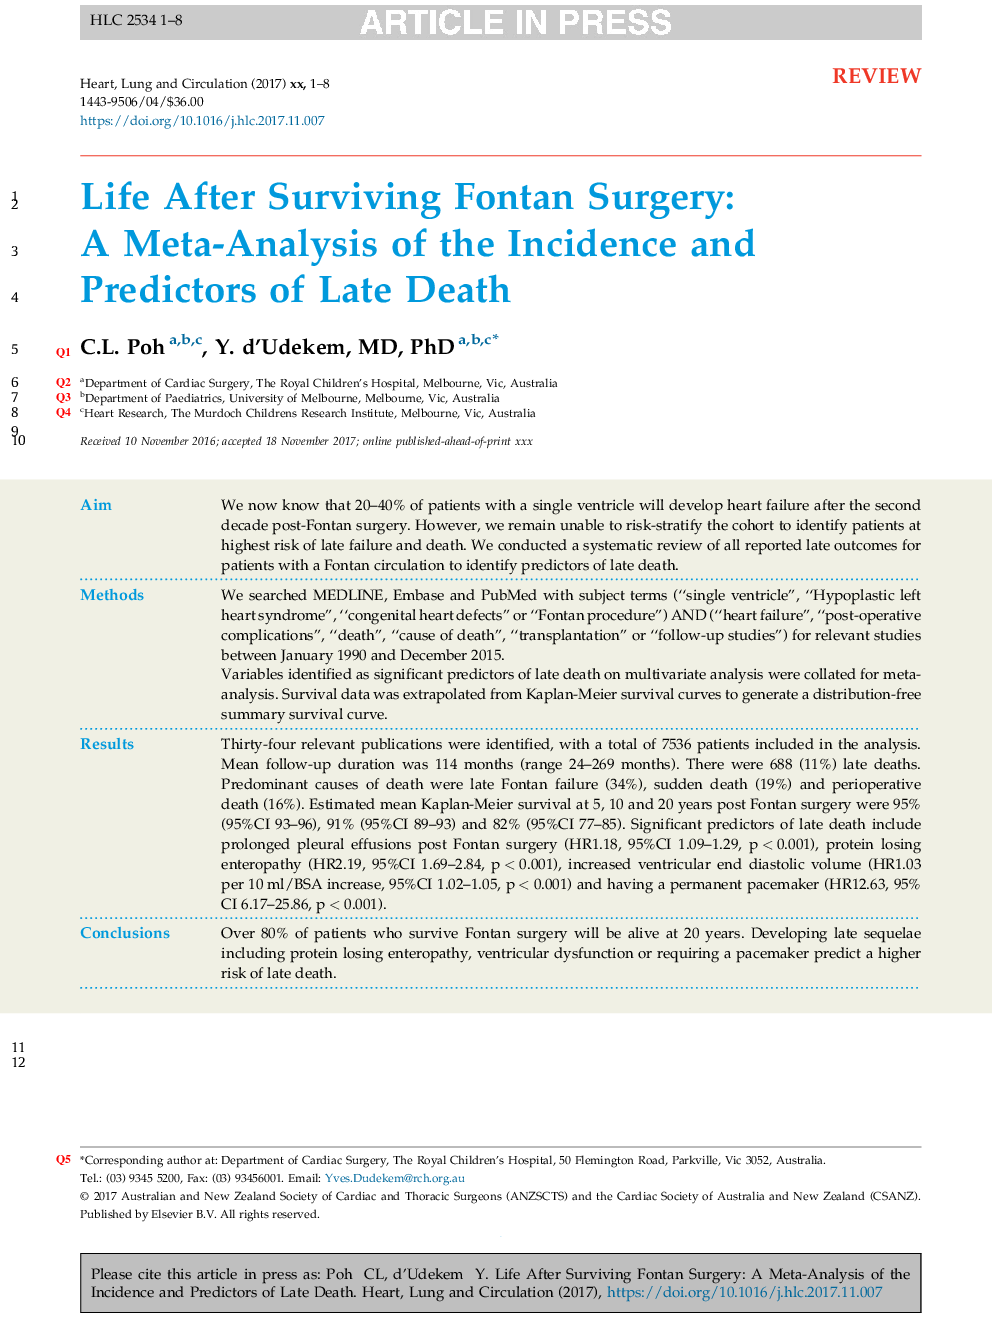 Life After Surviving Fontan Surgery: A Meta-Analysis of the Incidence and Predictors of Late Death